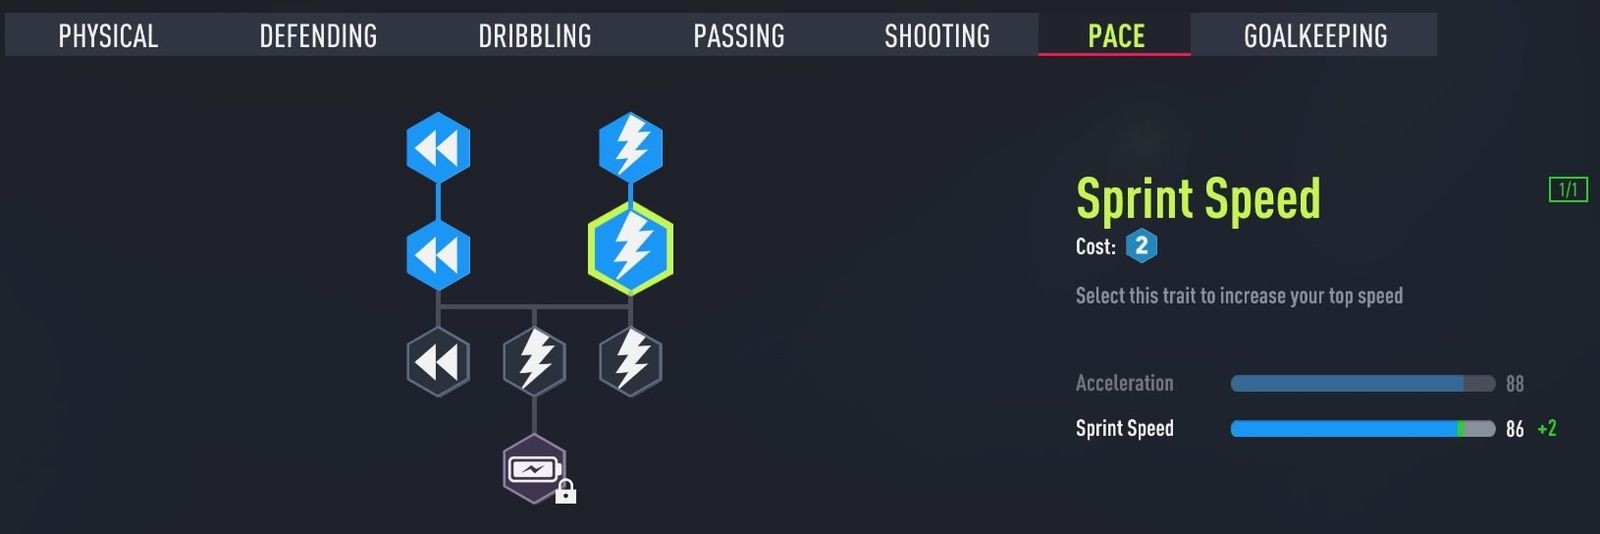 FIFA 22 Pro Clubs Pace Tree